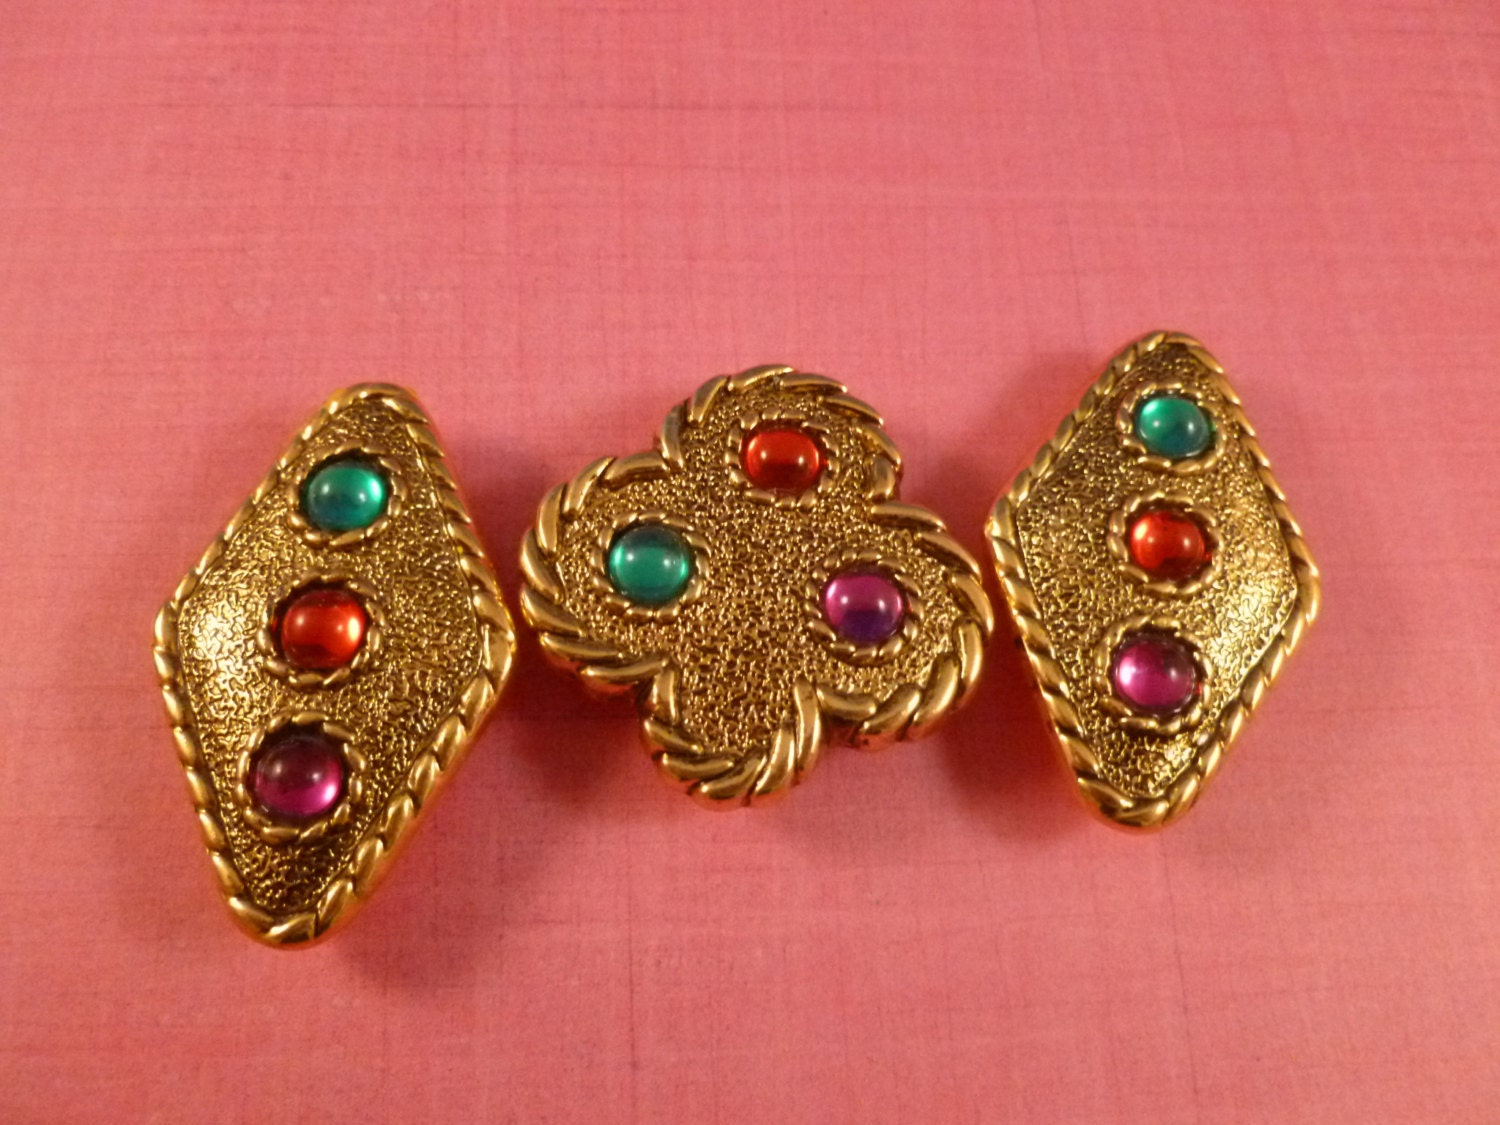 Gold Rhinestone Button Covers by DEJAVU143 on Etsy